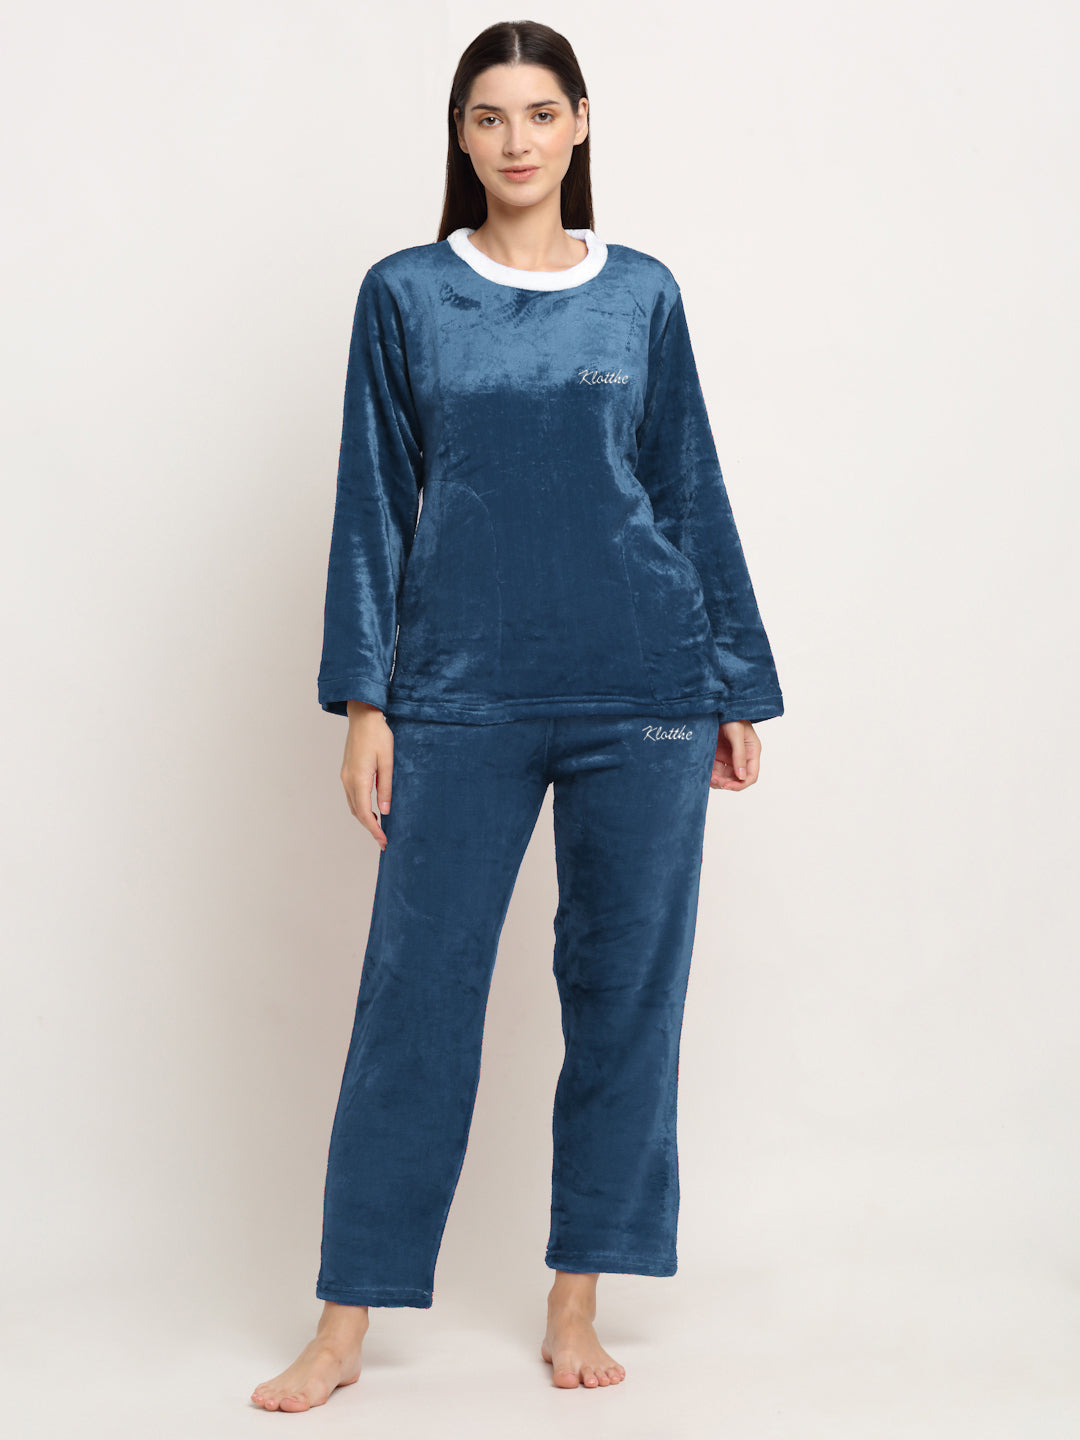 27 Cozy Pajamas You'll Want To Hibernate In This Winter